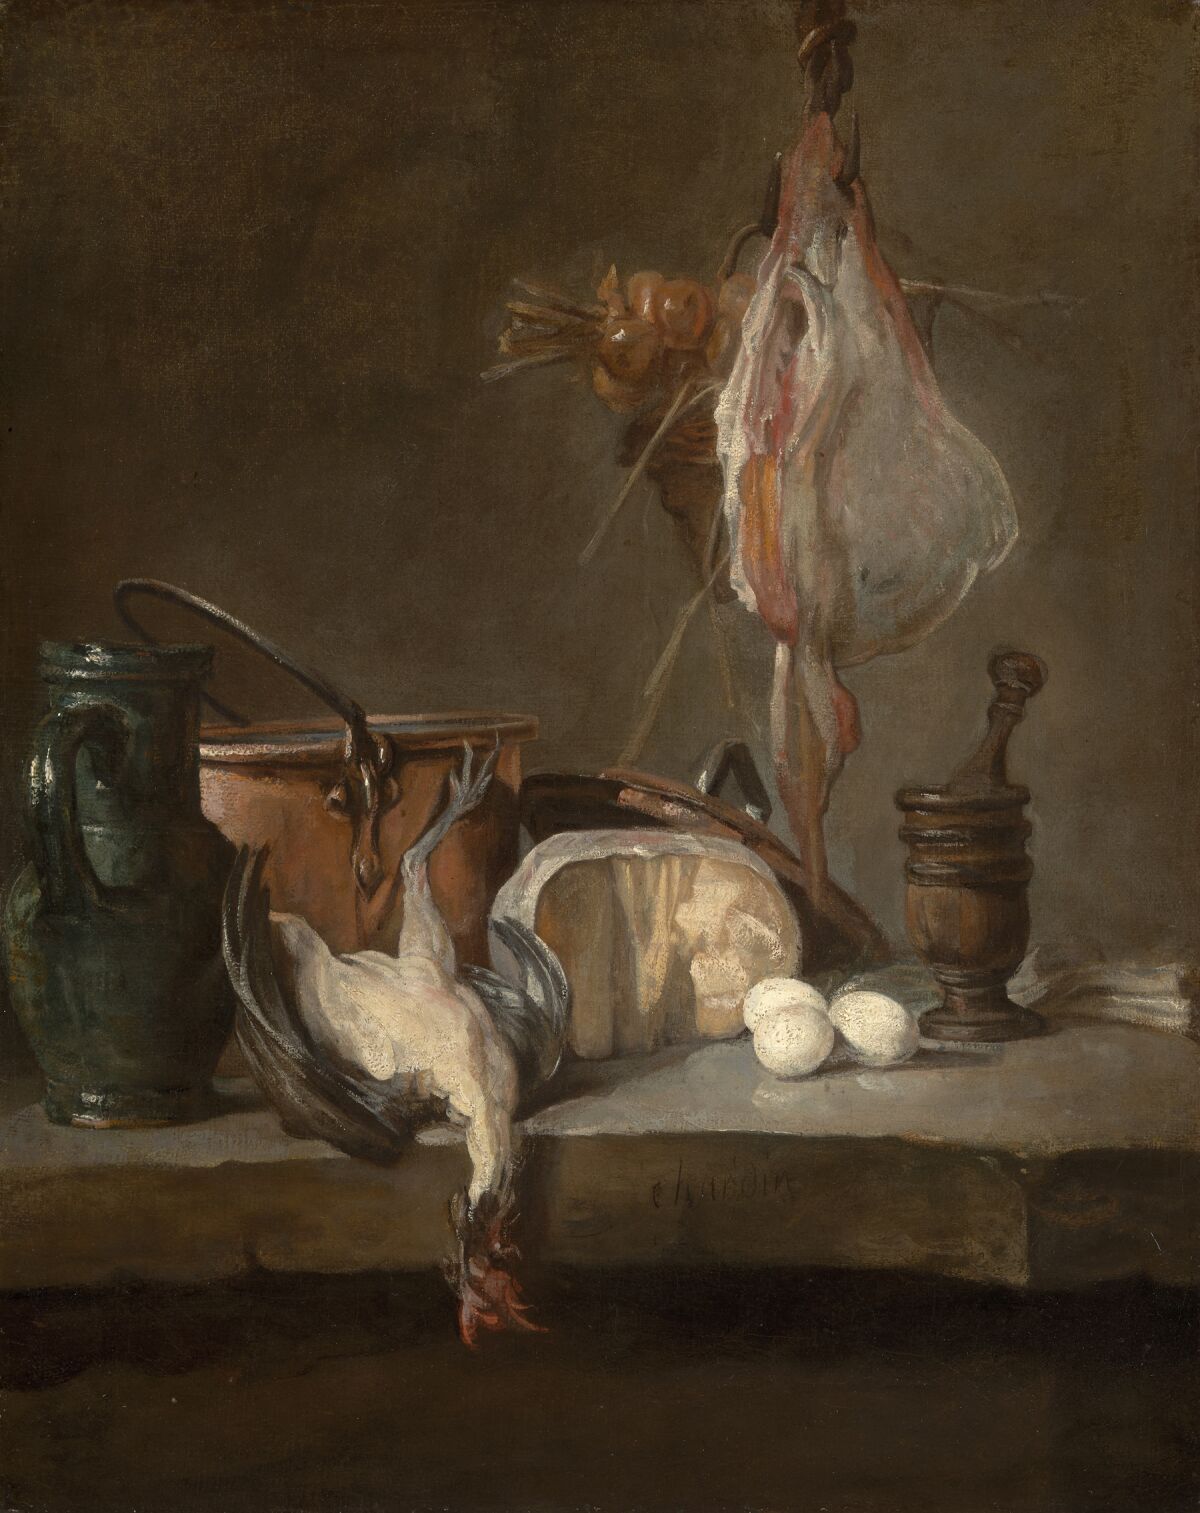 A painting of two chicken carcasses, near three eggs, a wheel of cheese, a bucket and a dark pitcher